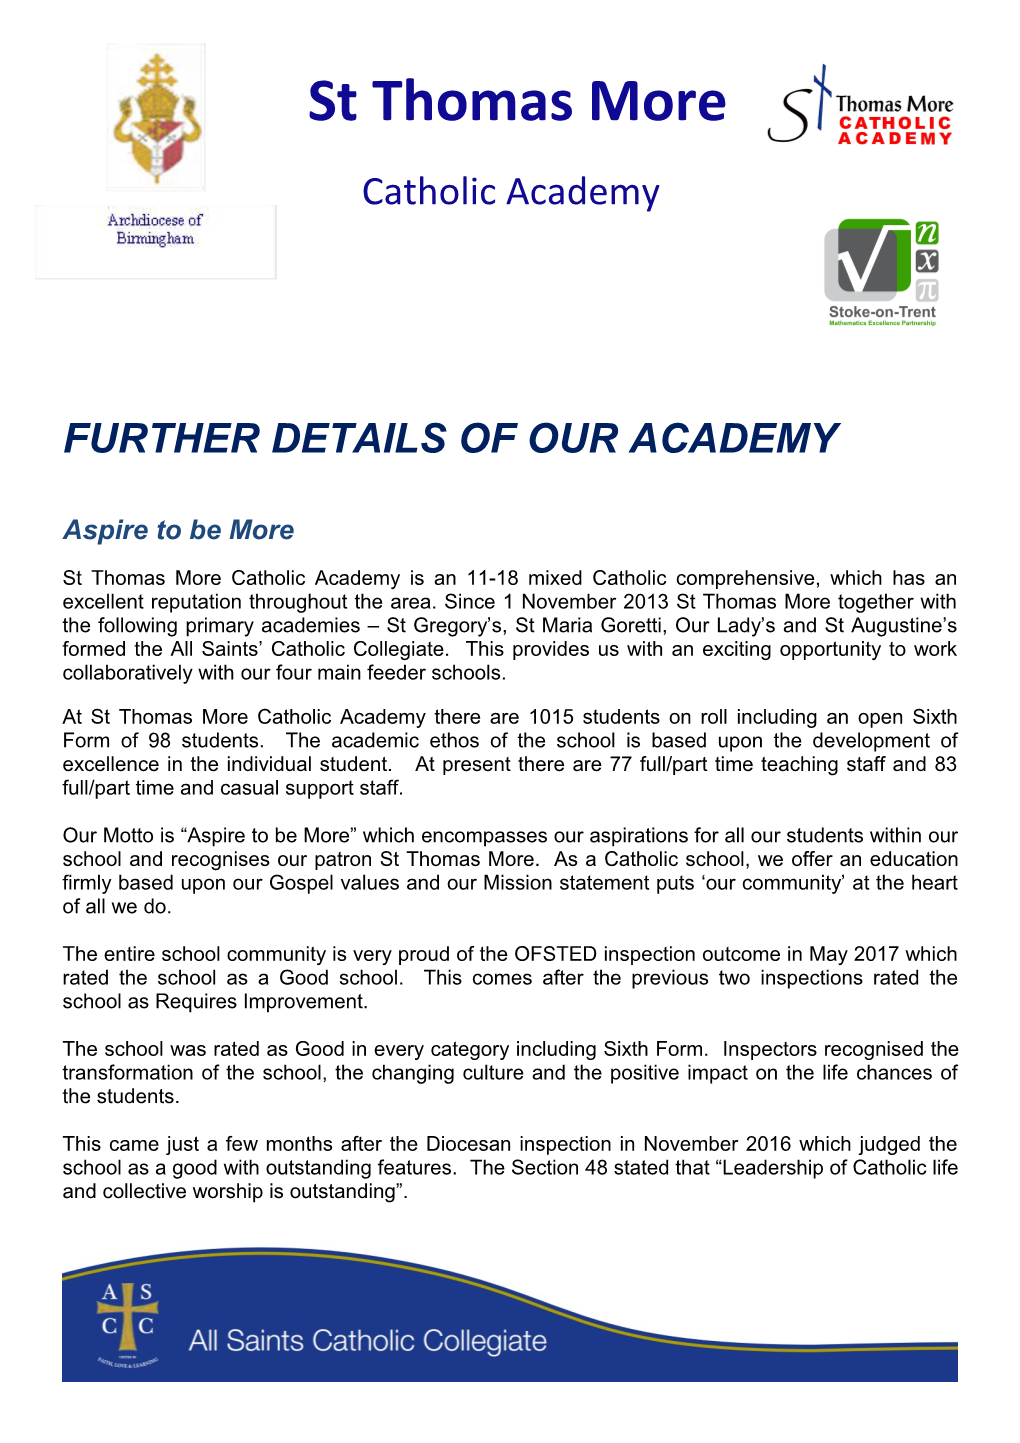 Further Details of Our Academy